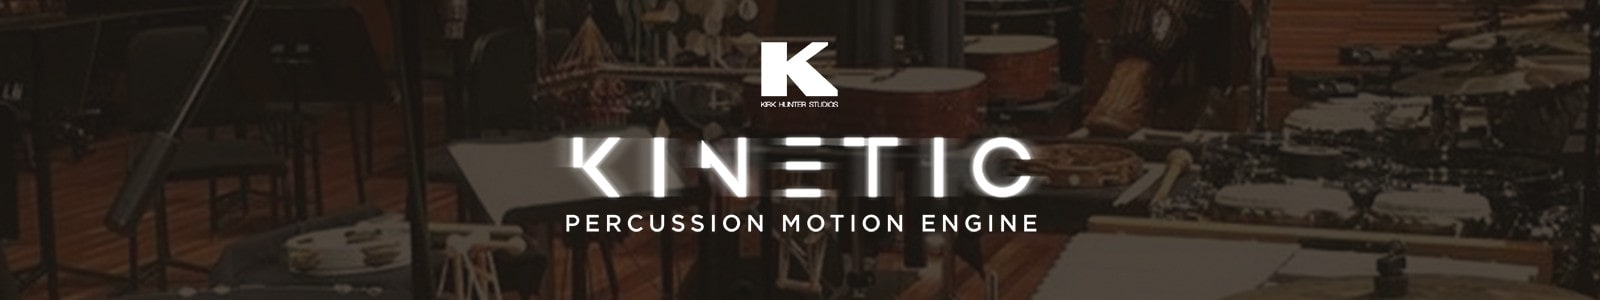 kinetic percussion motion engine